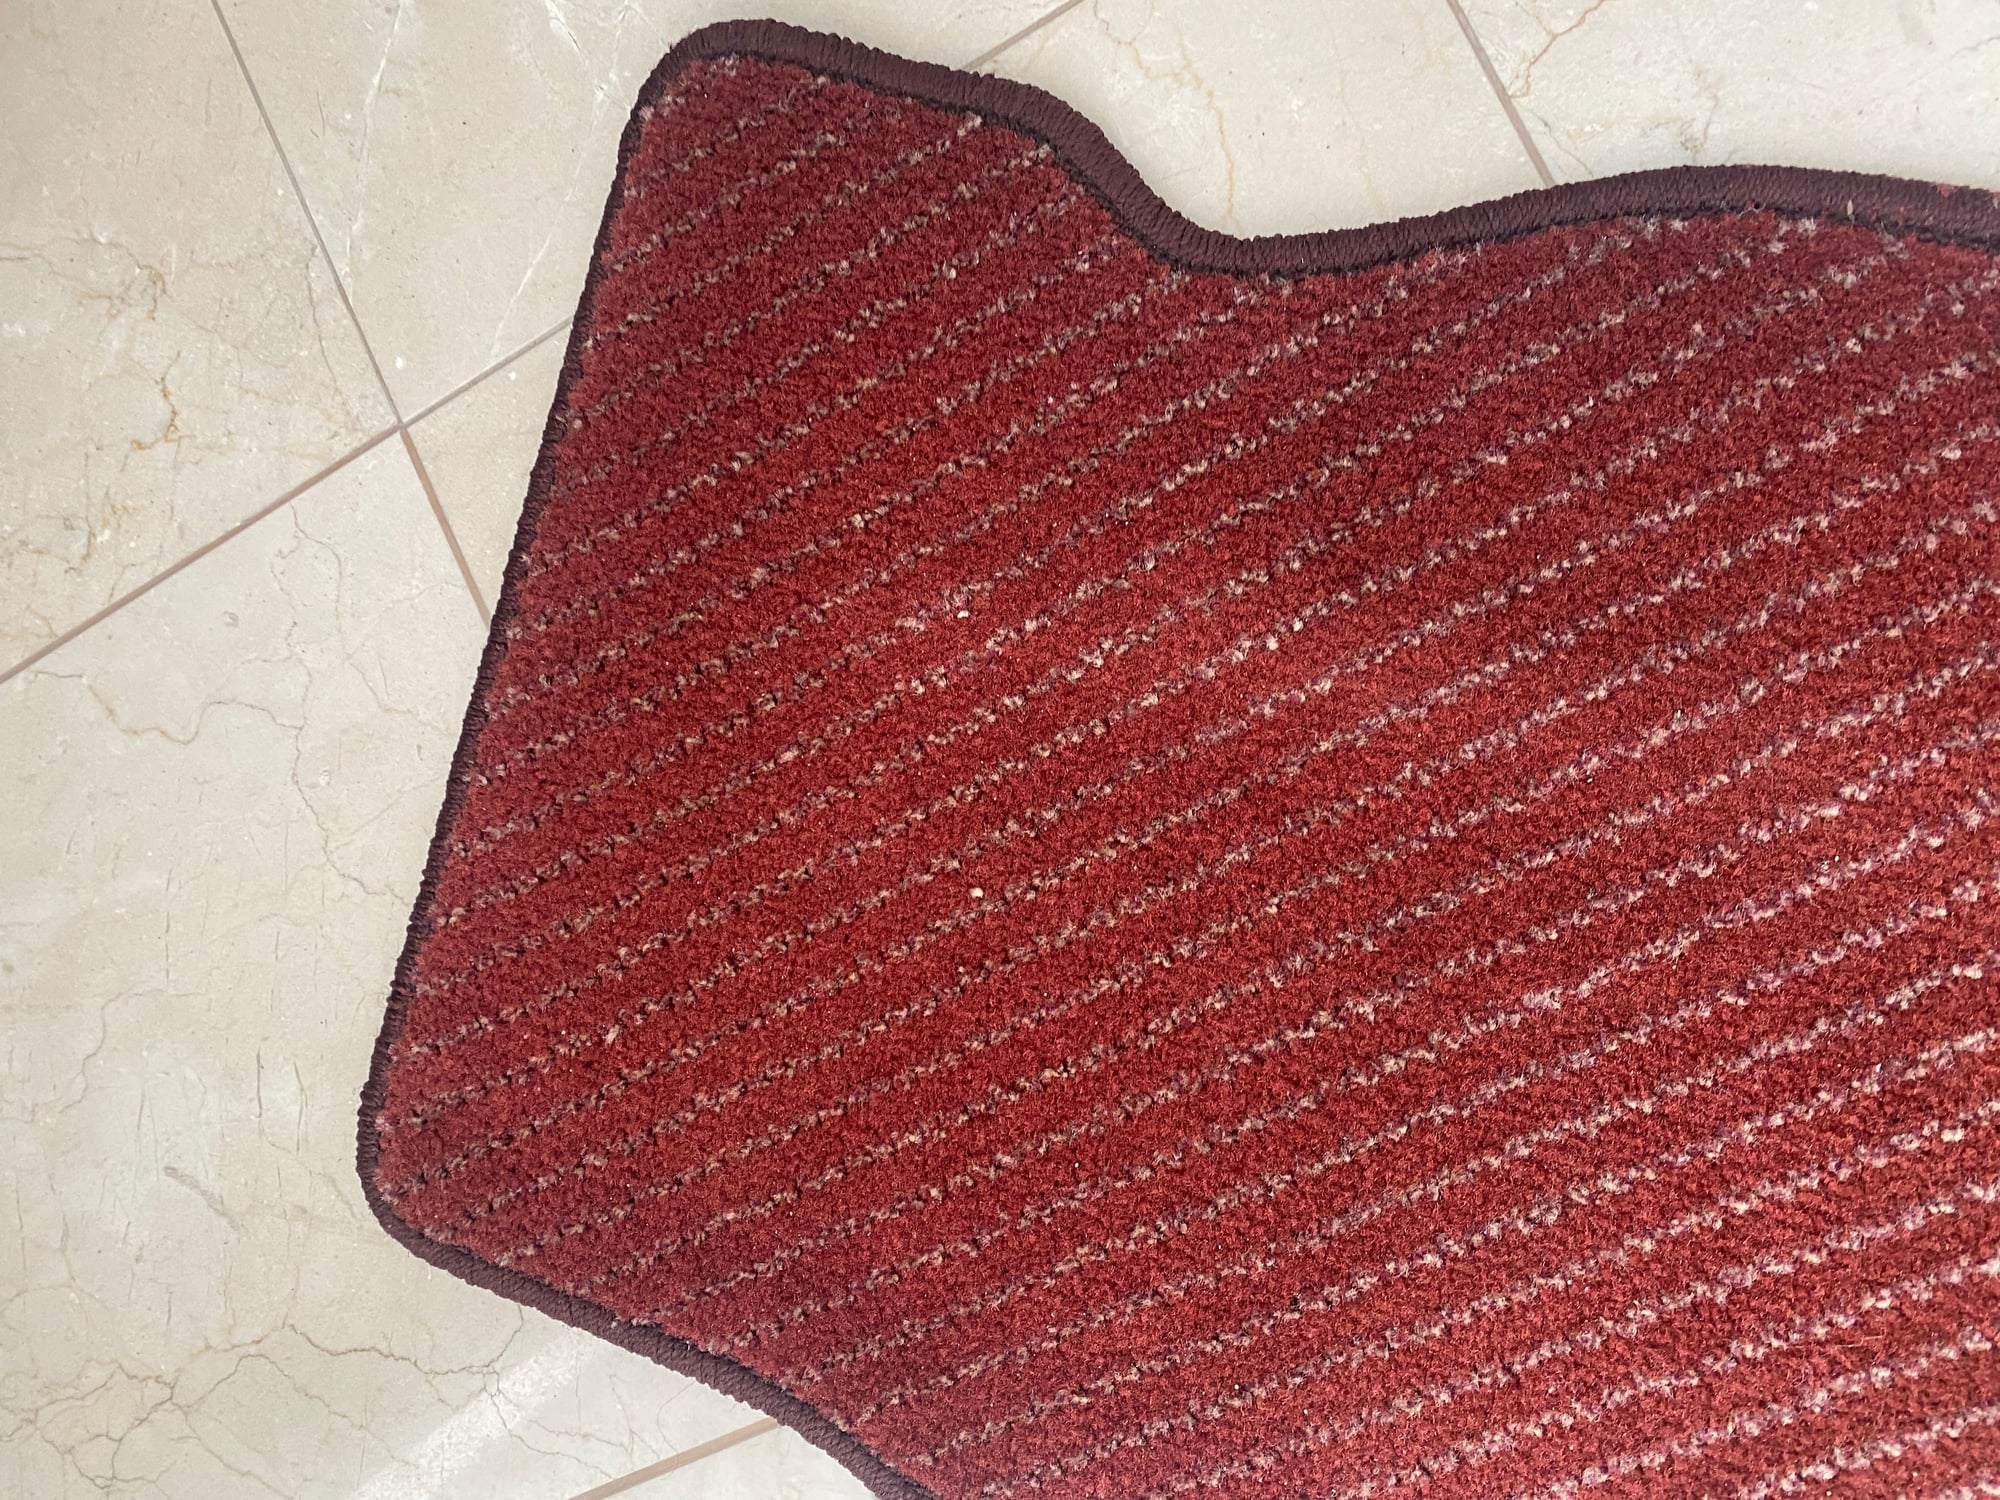 Interior/Upholstery - Red floor mats - Used - 1993 to 2001 Mazda RX-7 - Chicago, IL 60647, United States